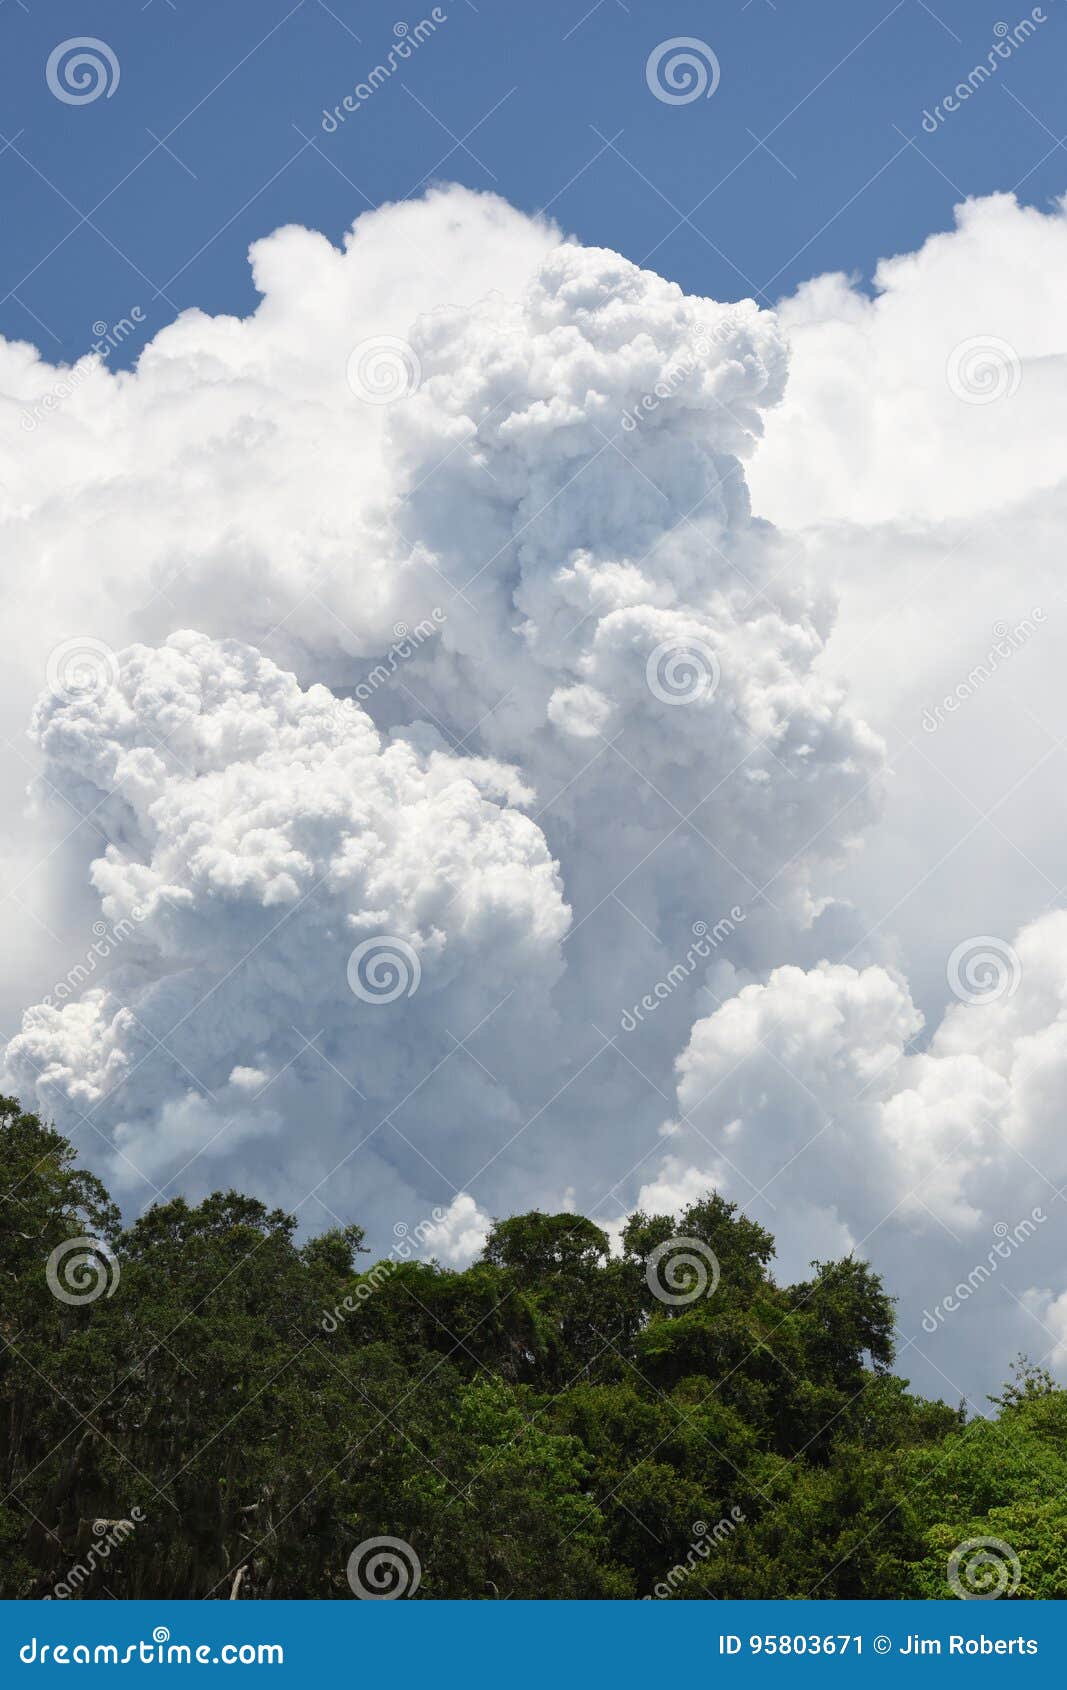 Roiling Storm Clouds stock image. Image of county, thunderheads